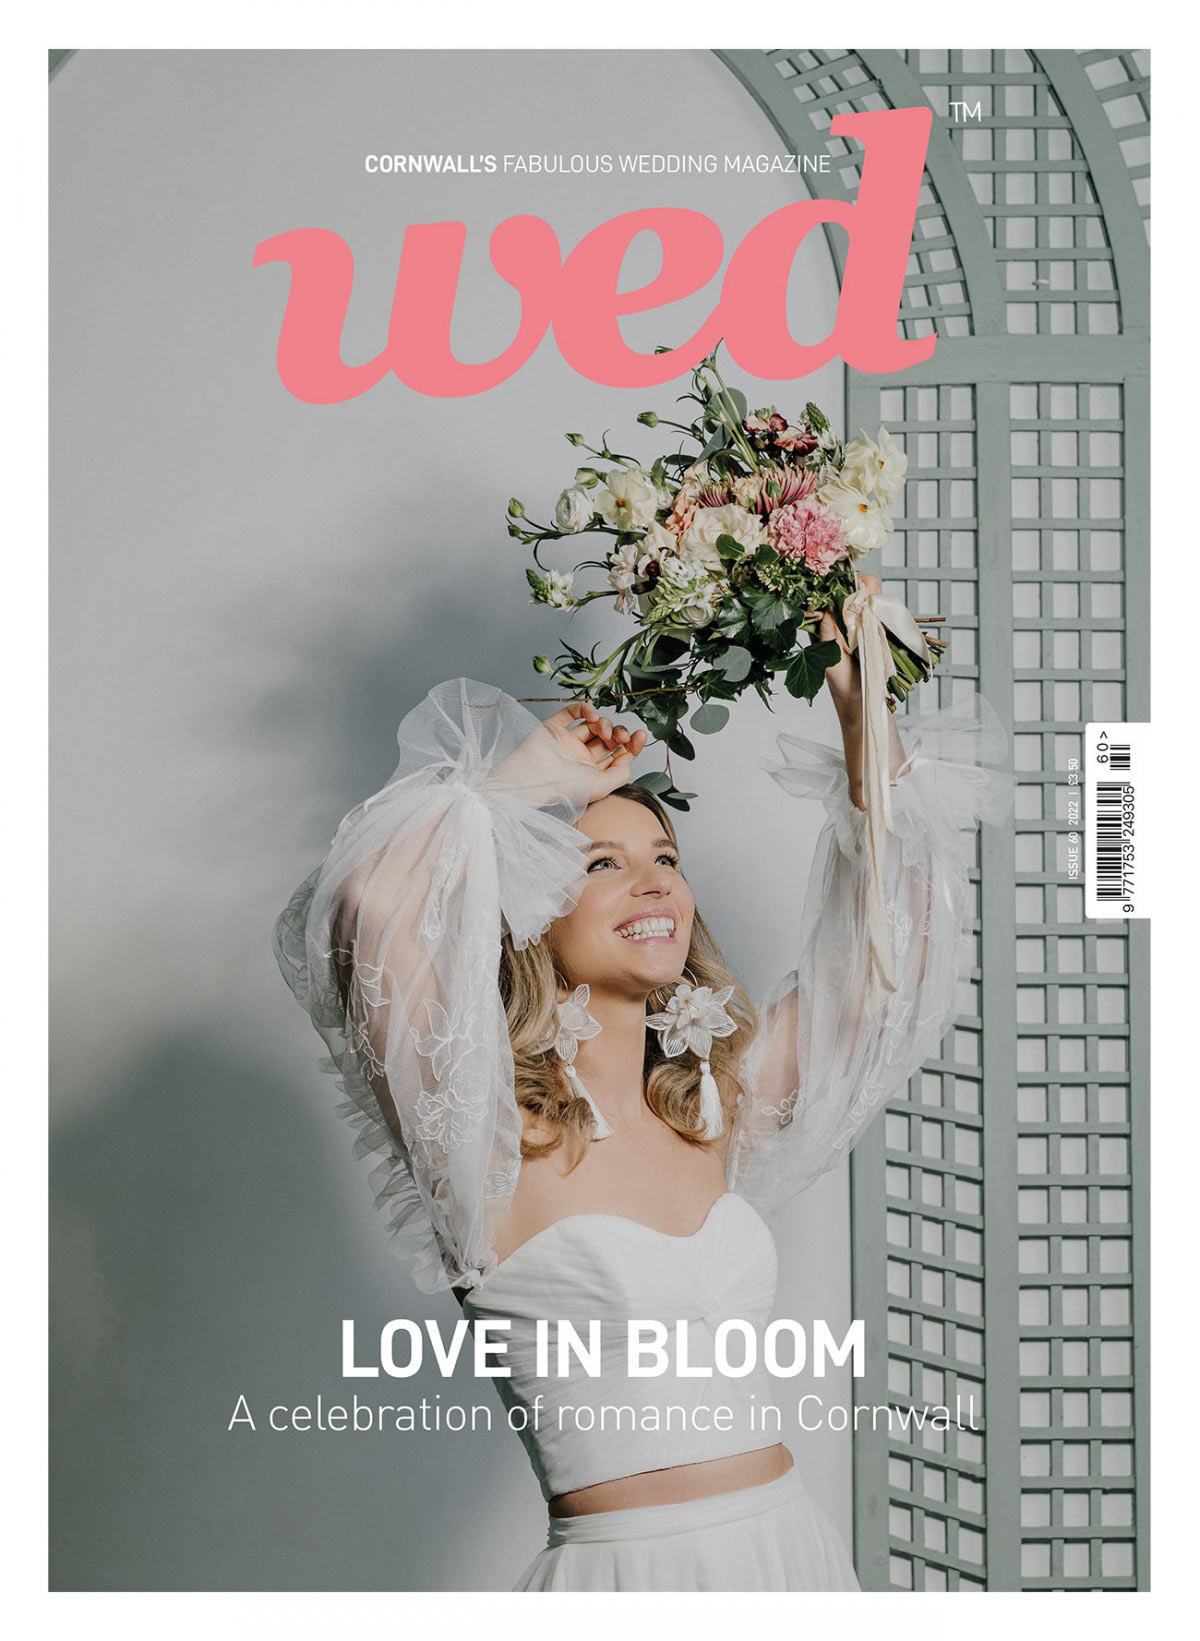 Order a print copy of Cornwall Wed Magazine - Issue 60